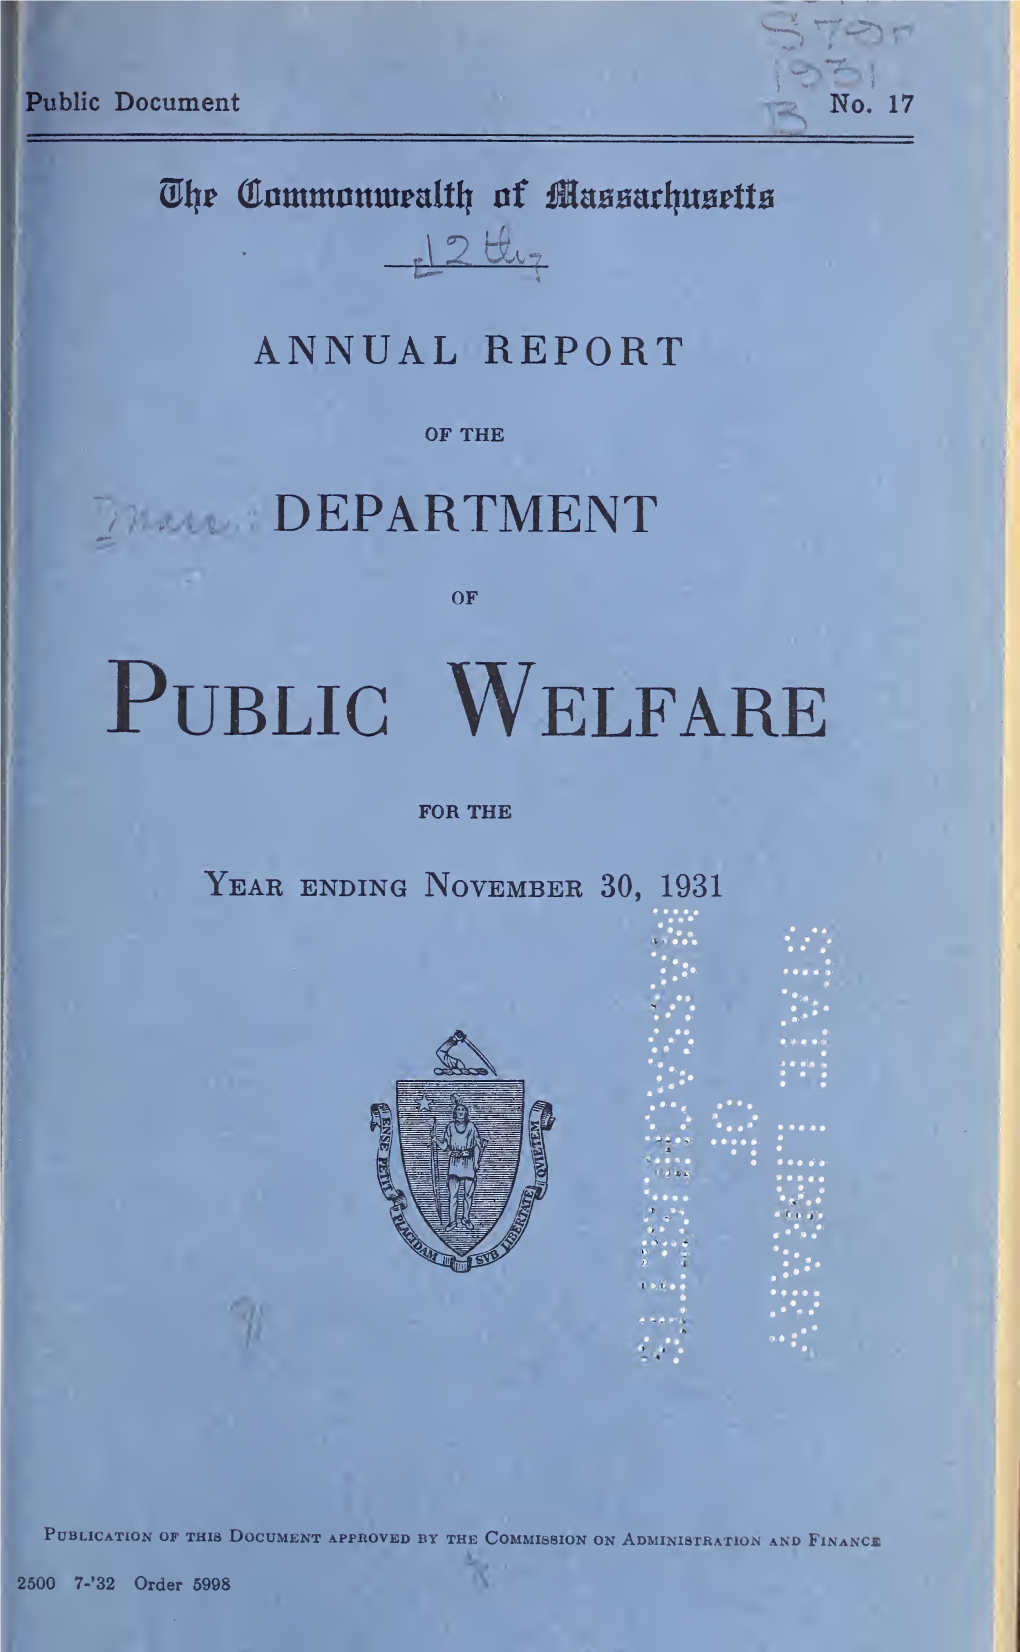 Annual Report of the Department of Public Welfare, Covering the Respectfully Year from December 1, 1930, to November 30, 1931, Is Herewith Presented